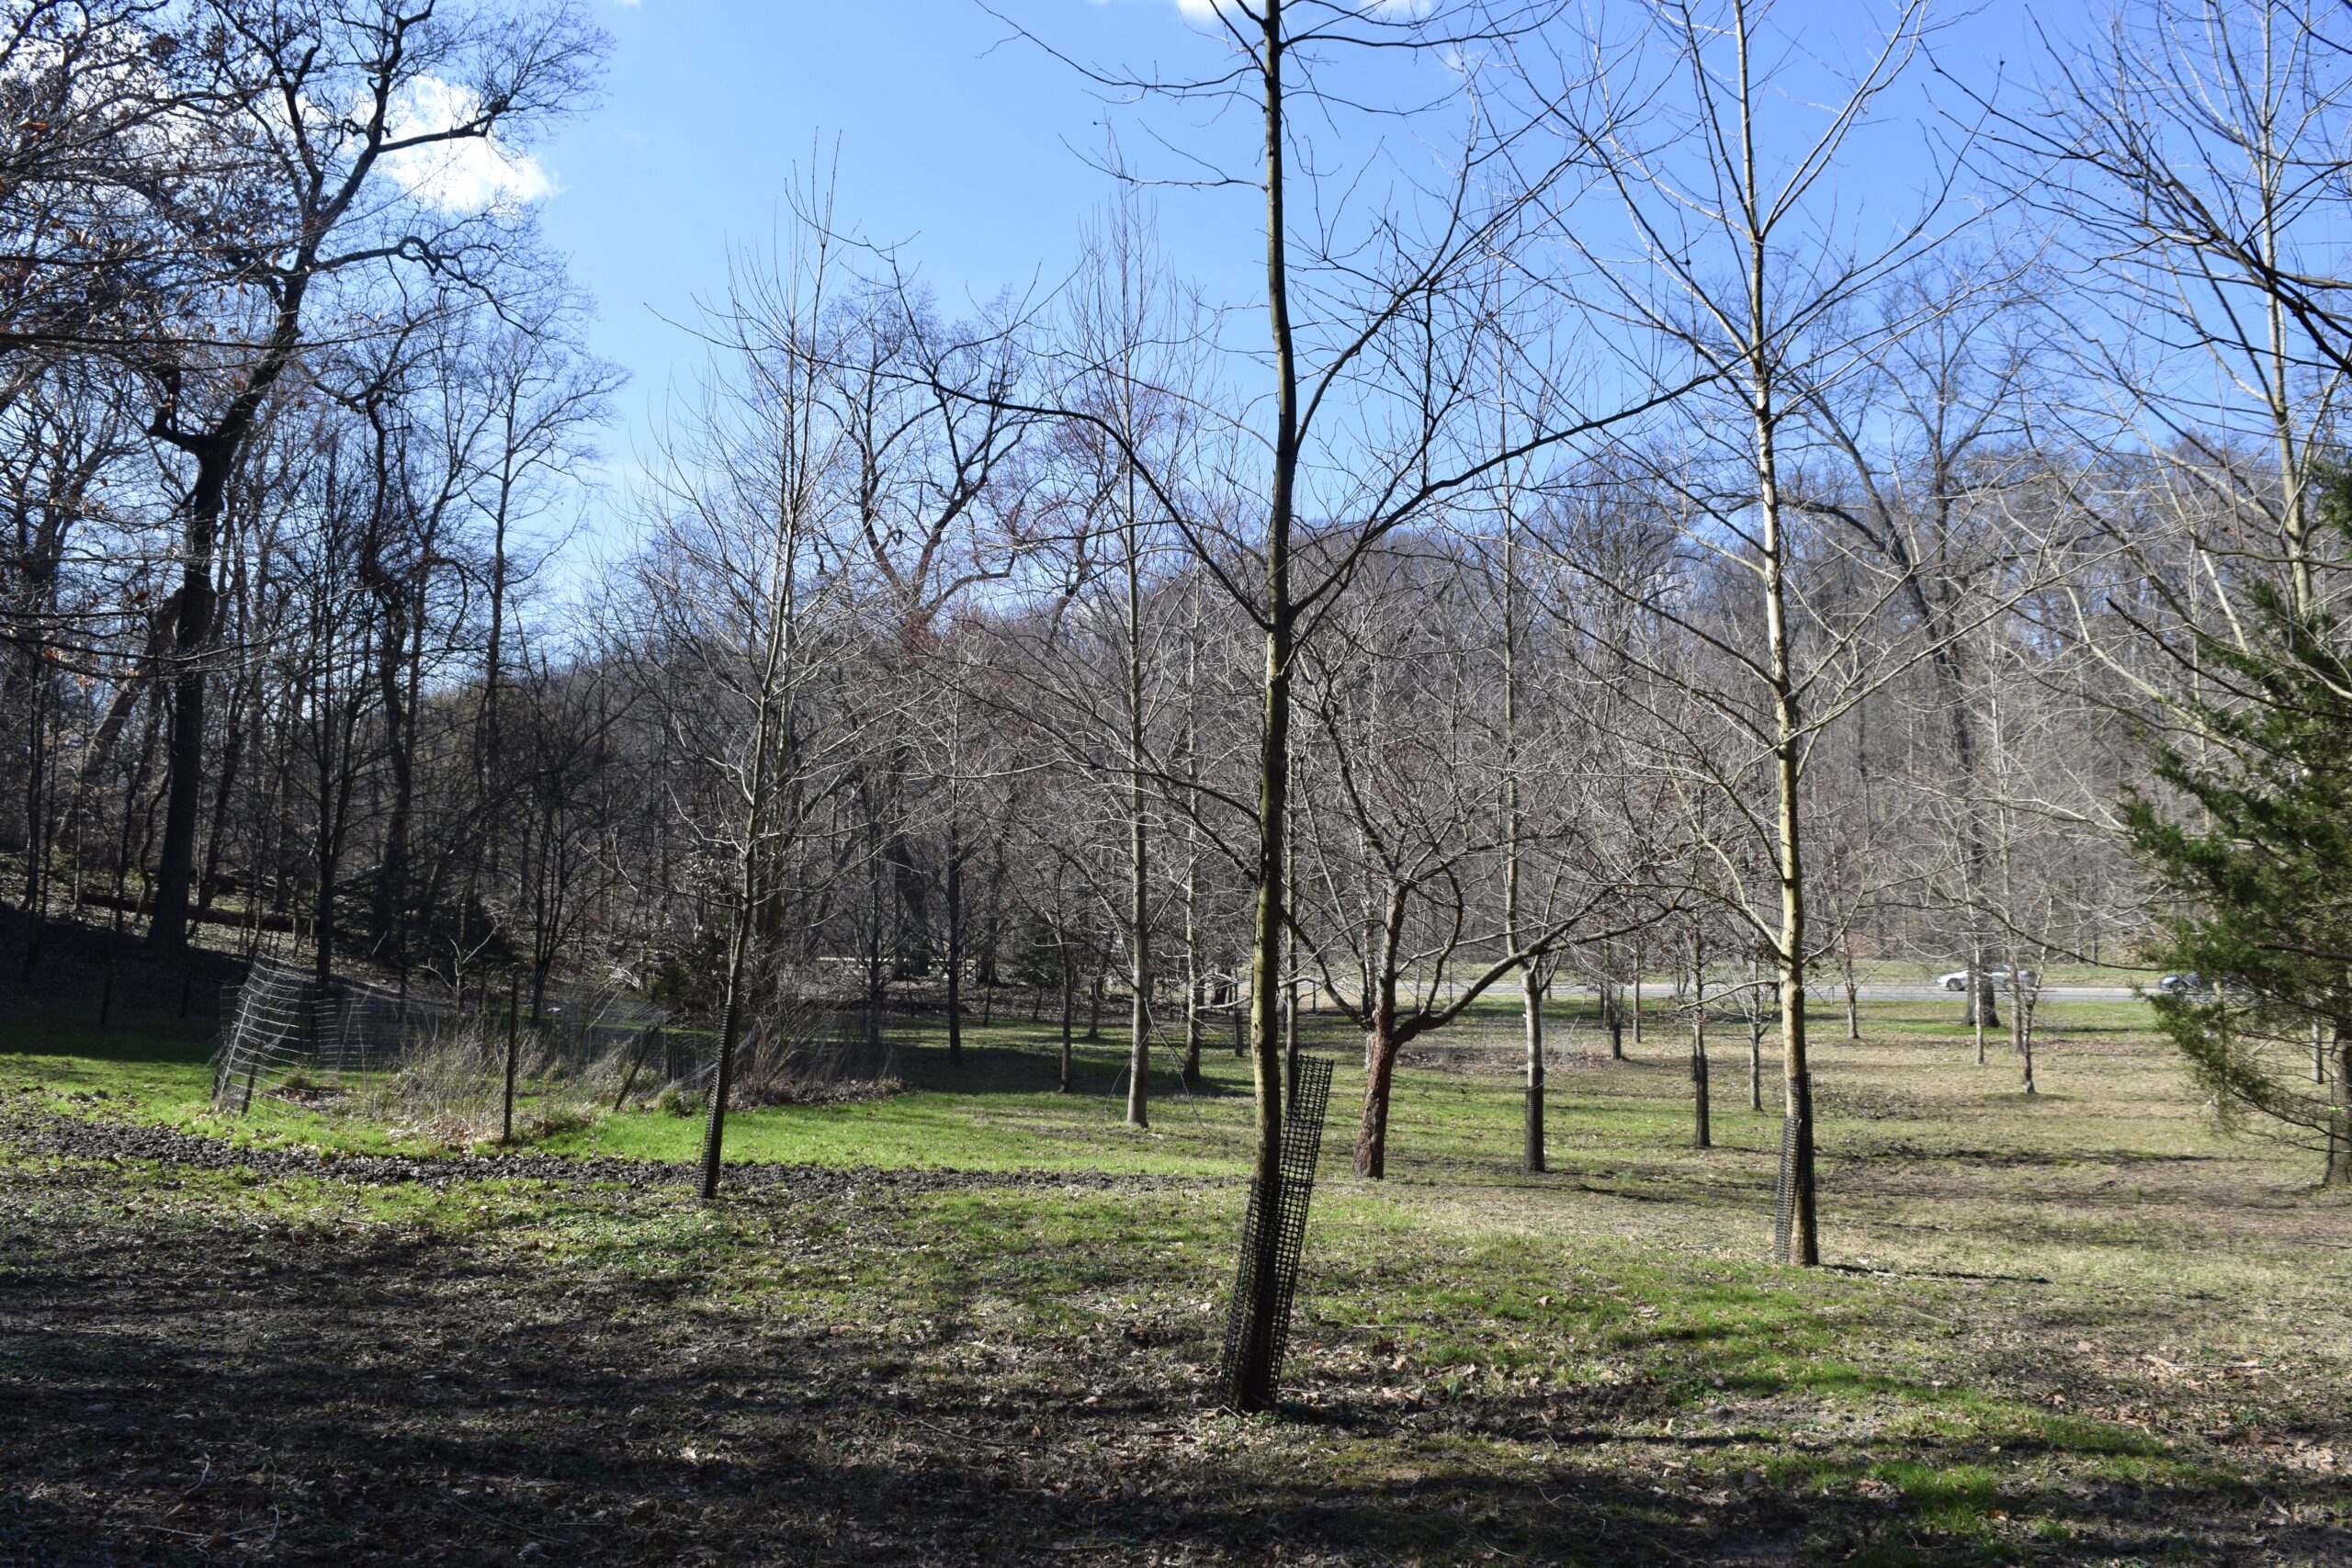 The organization has planted more than 600 native trees in the Piney Branch area in the past decade. The region was once a biodiverse “magnolia bog” home to sweetbay magnolia, highbush blueberry, sphagnum moss, and other plants that grow in the swampy acidic soil.